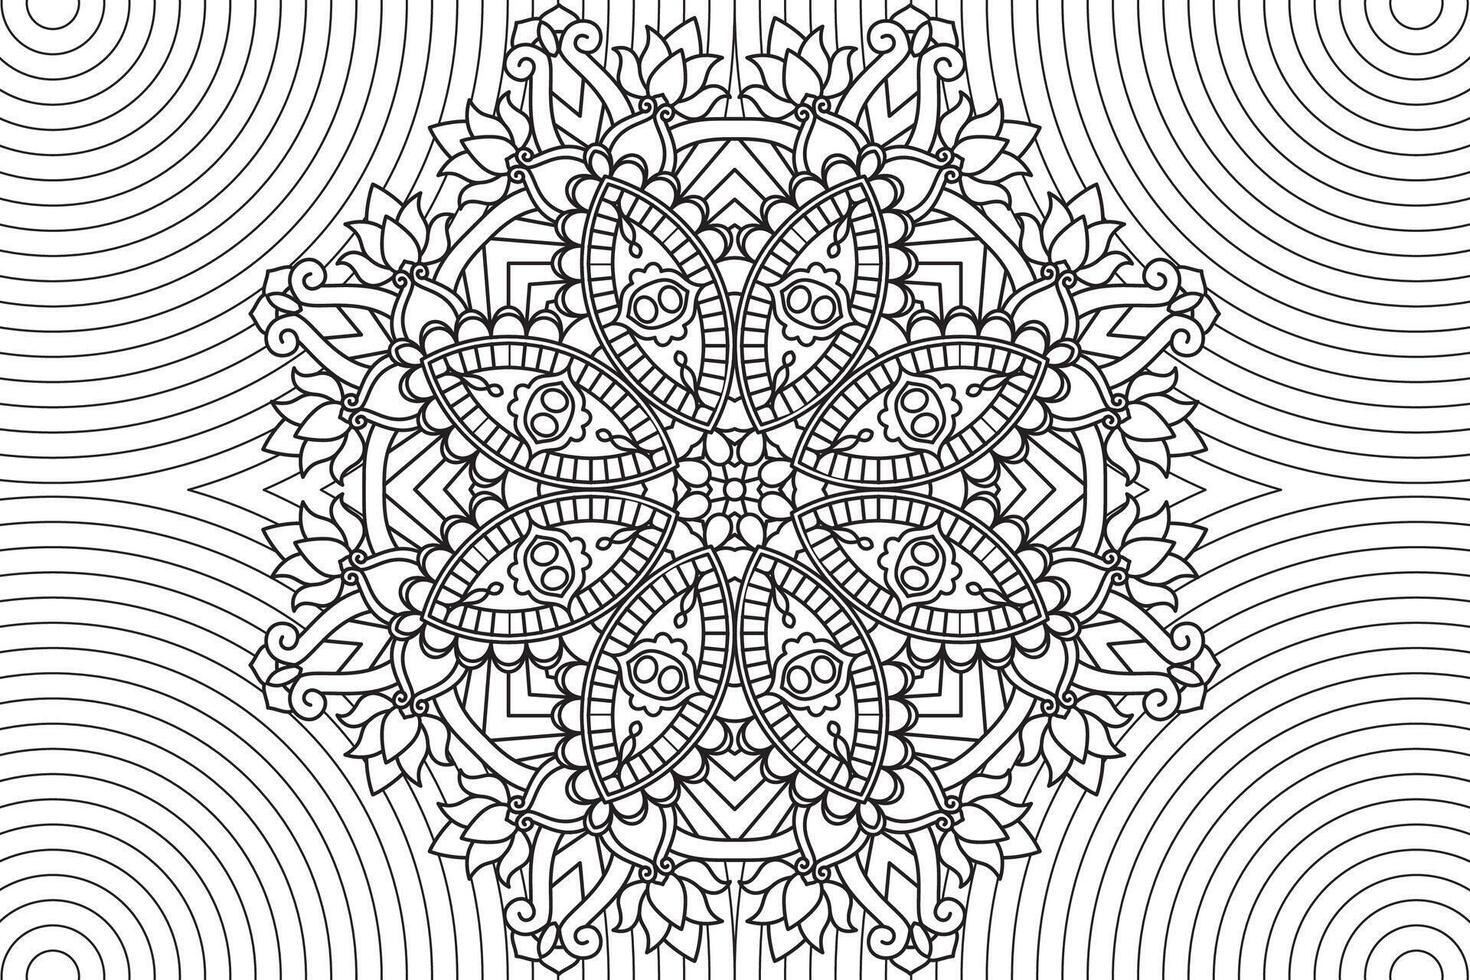 Mandala Coloring relaxation and meditation page for kids and adults. Circular pattern mandala. Decorative Oriental and Arabic ornament ethnic style. Line art drawing coloring page vector